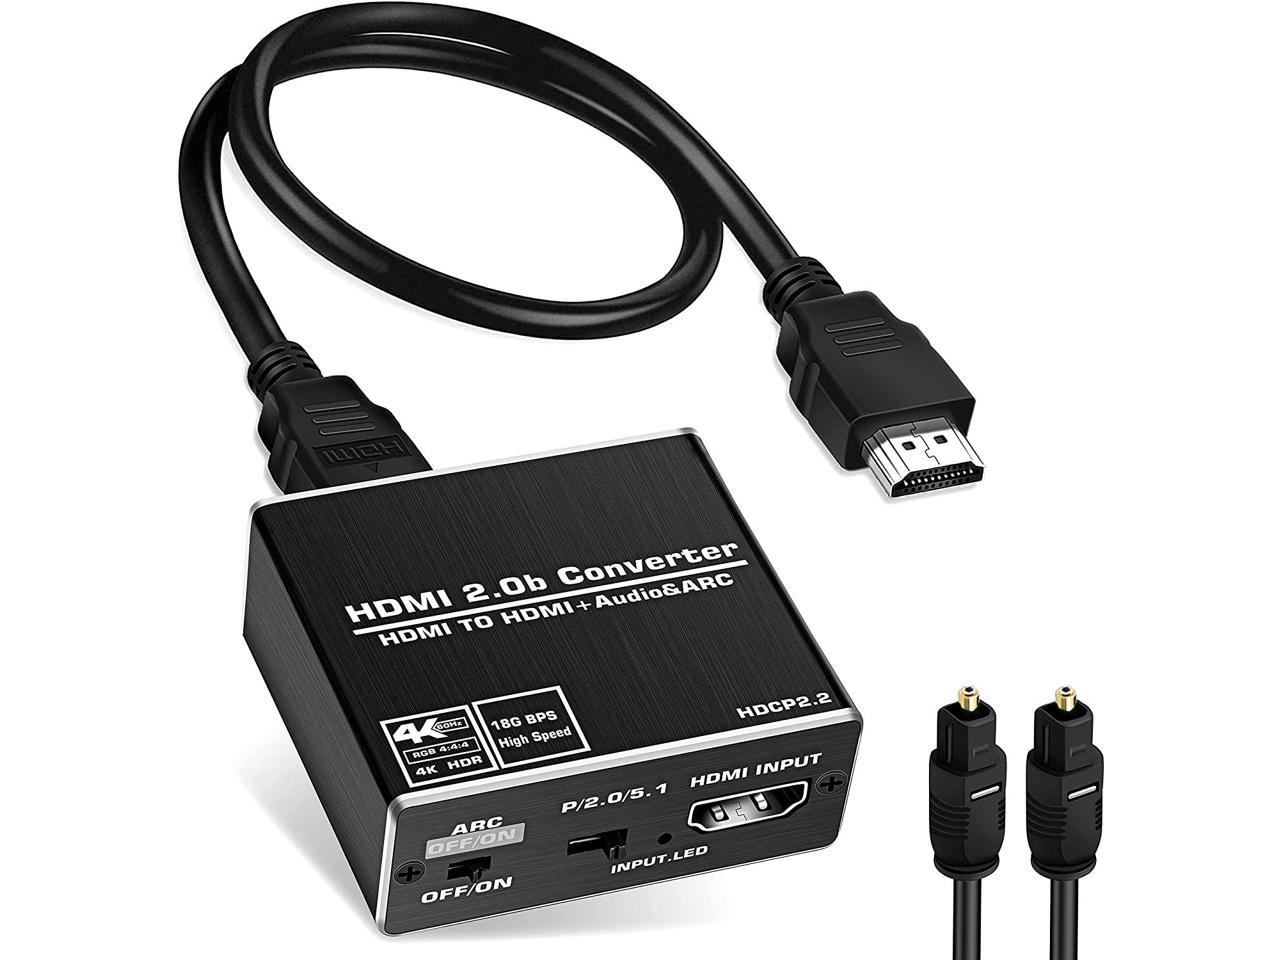 HDMI 2.0 Audio Extractor 4K@60Hz YUV 4:4:4 and HDR Adapter HDMI to Optical Toslink SPDIF RCA R/L + 3.5mm Stereo Audio Converter for Blu-ray Player Xbox One X PS4 Pro Laptop Projector HDTV 